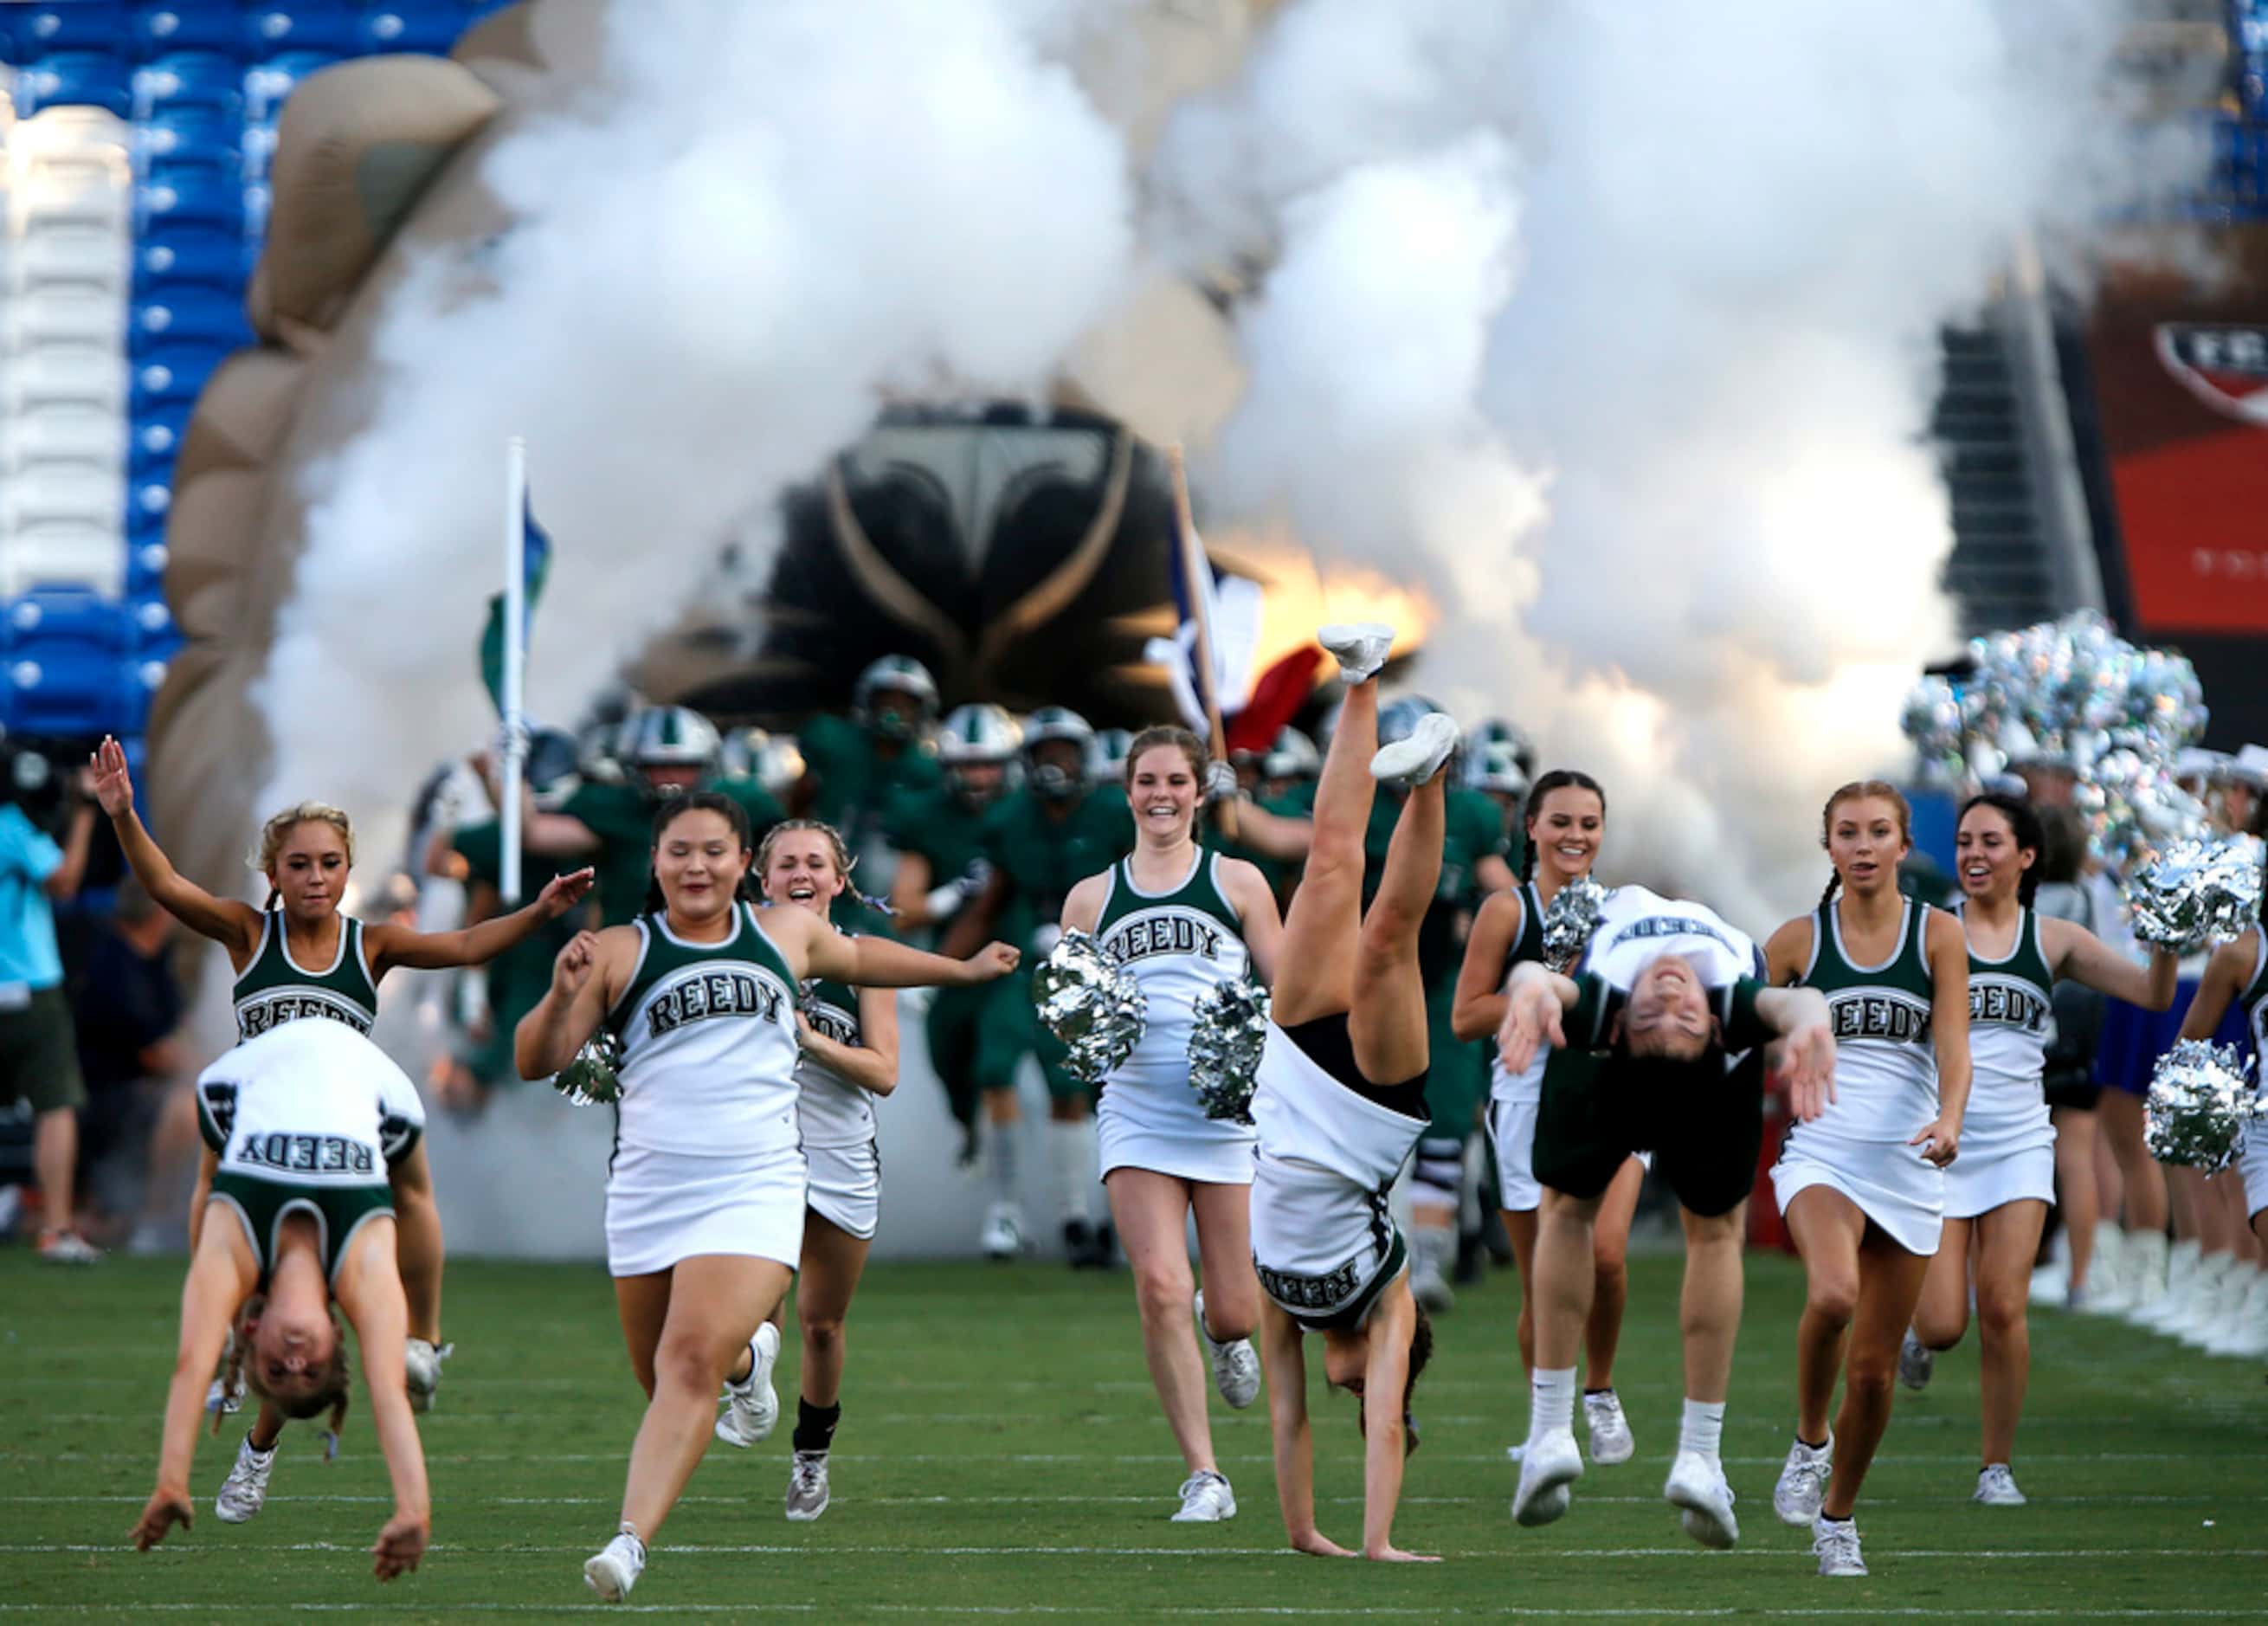 Reedy High School takes the field before kick off as they hosted Plano West High School in a...